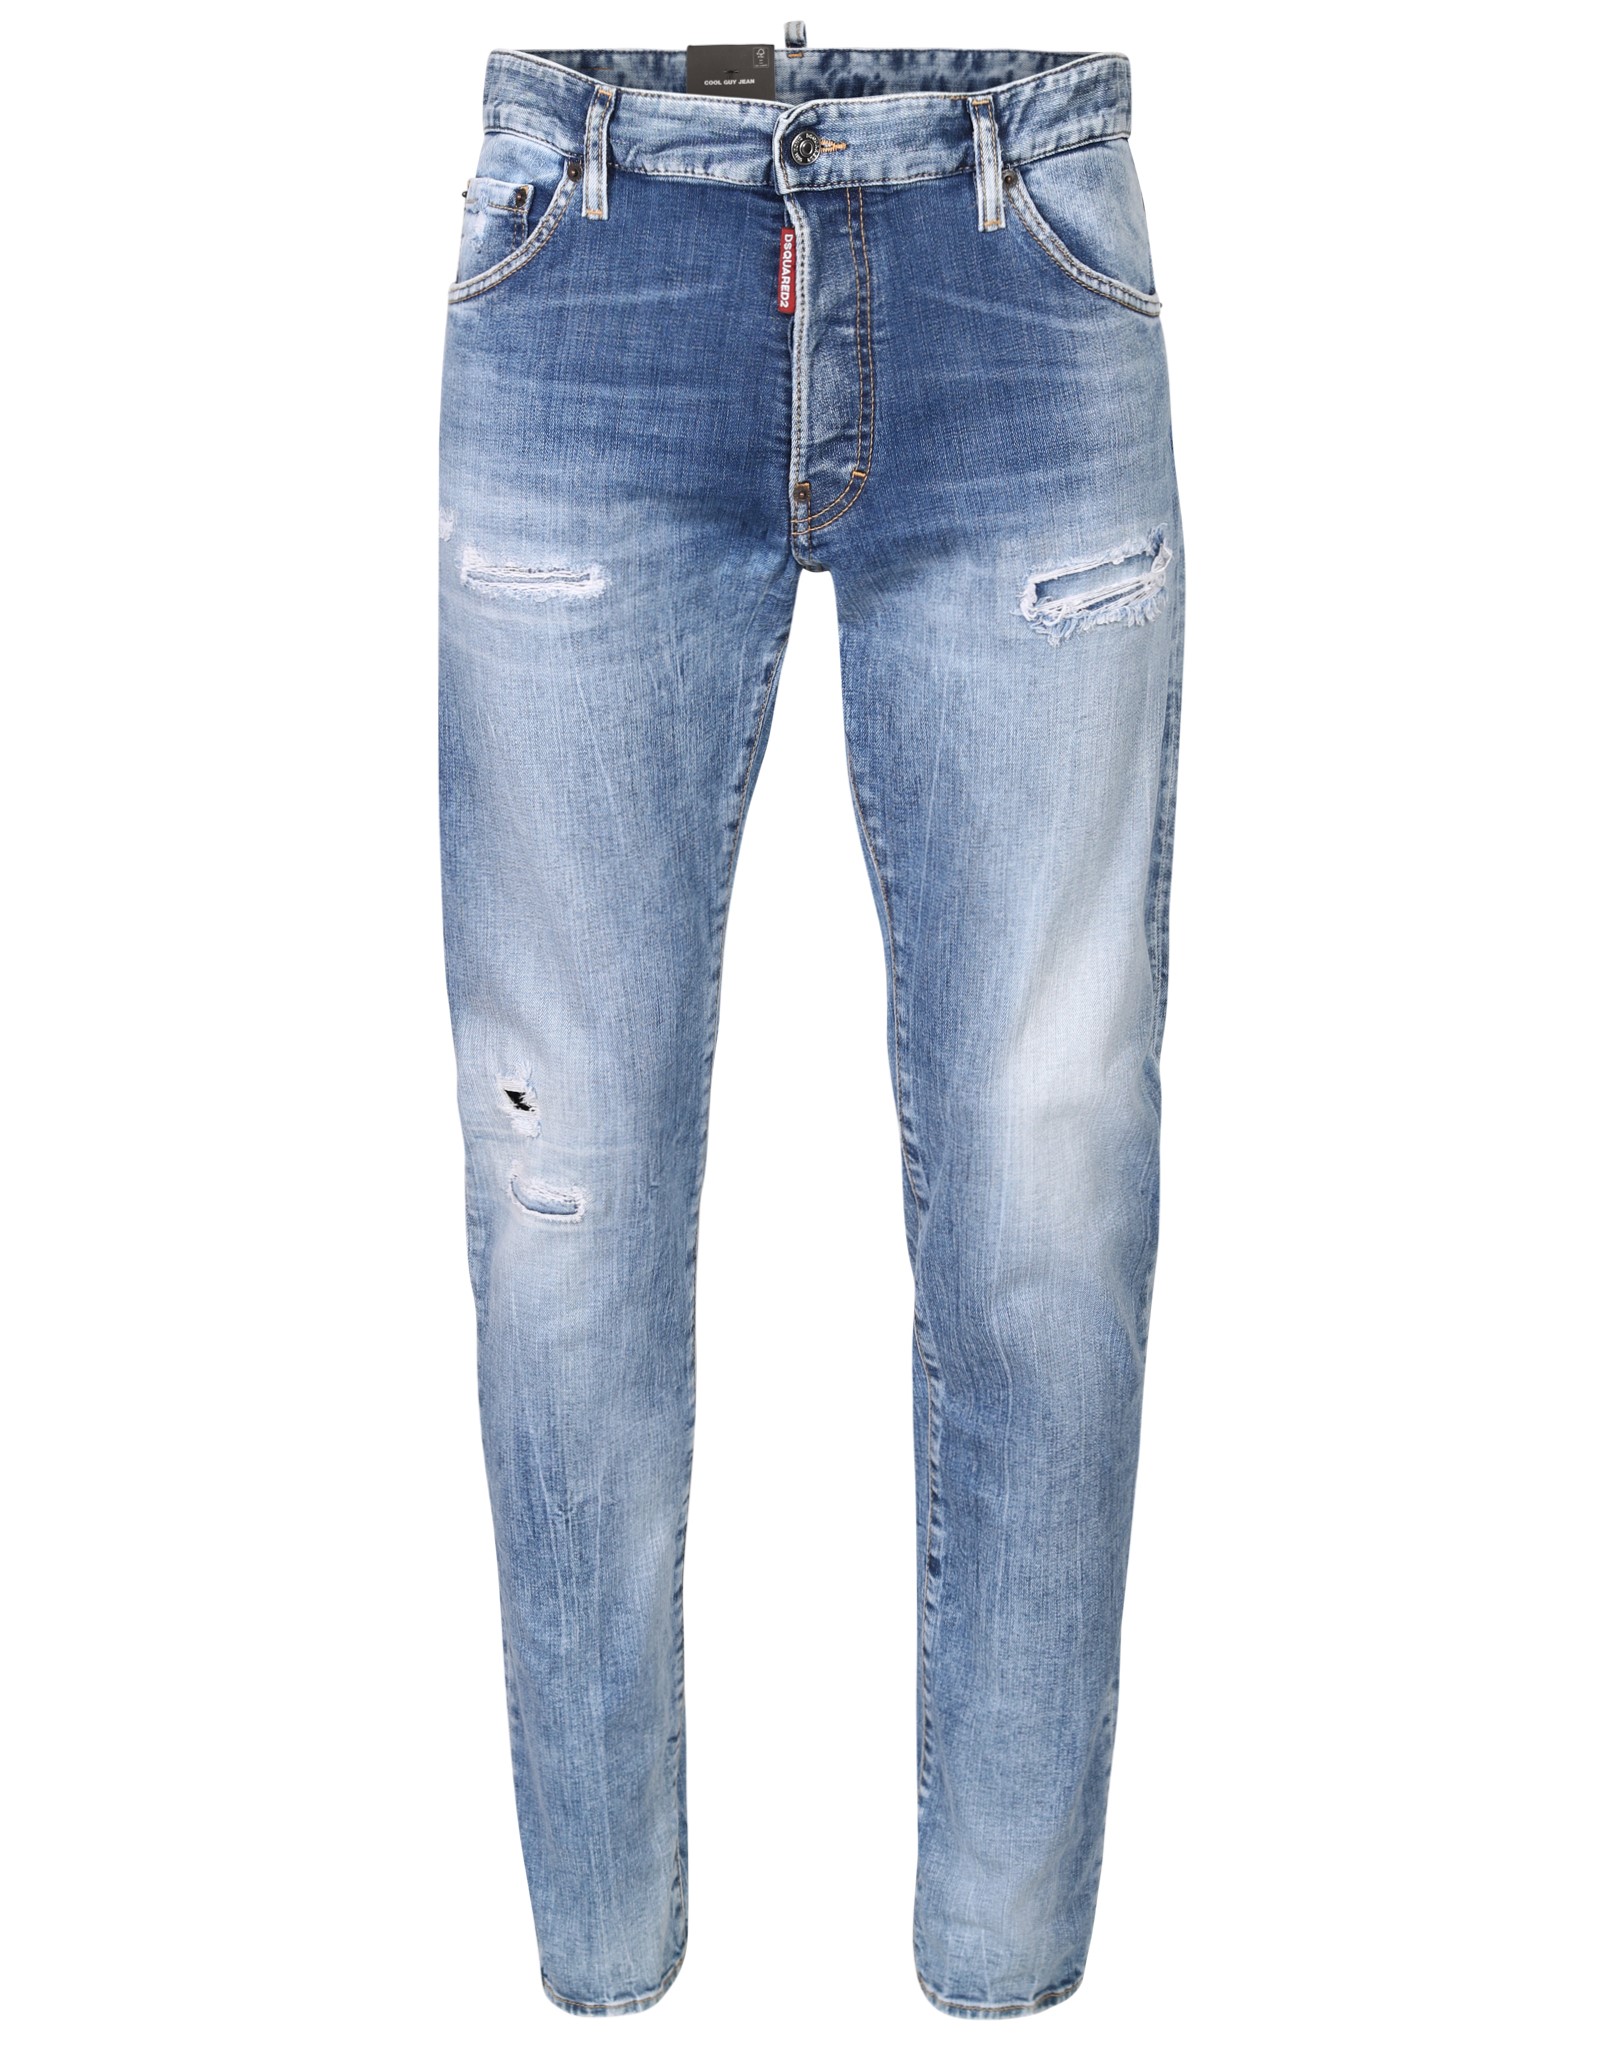 DSQUARED2 Cool Guy Jeans in Light Blue Washing 46